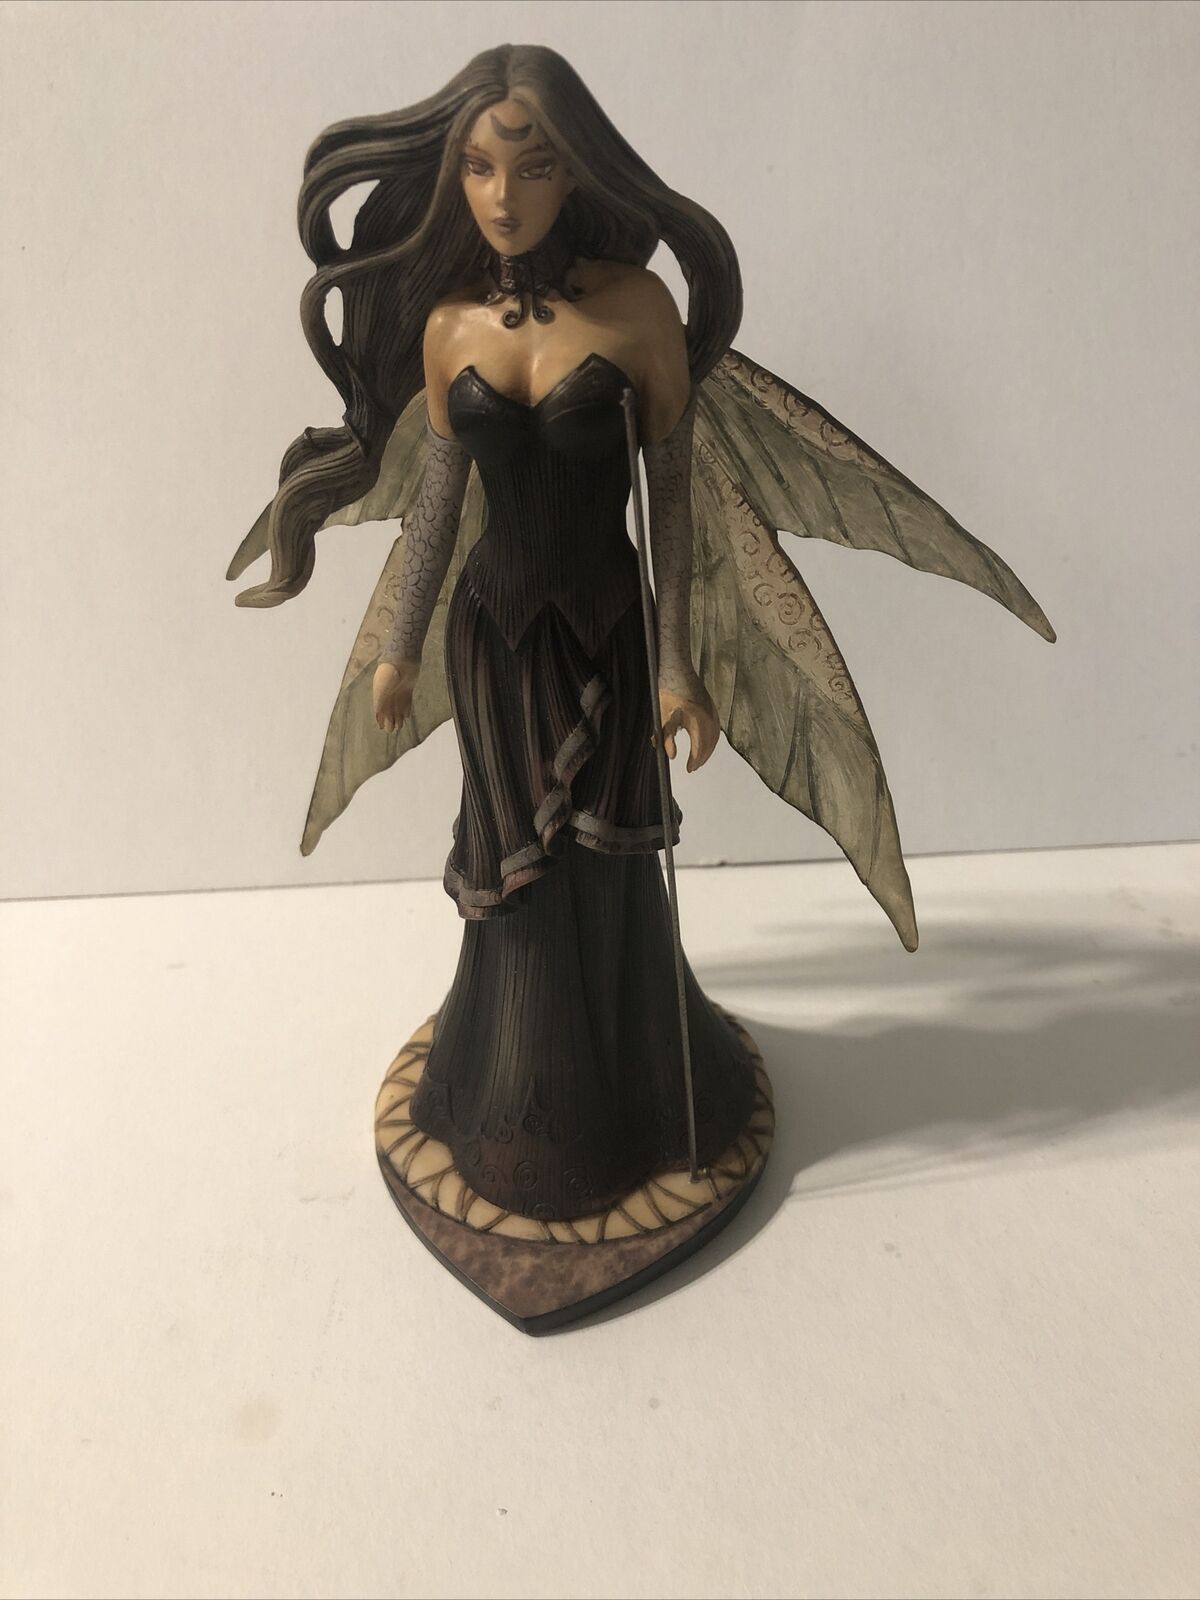 The Dragonsite Dark Queen L/e #2608 Mythical Figurine